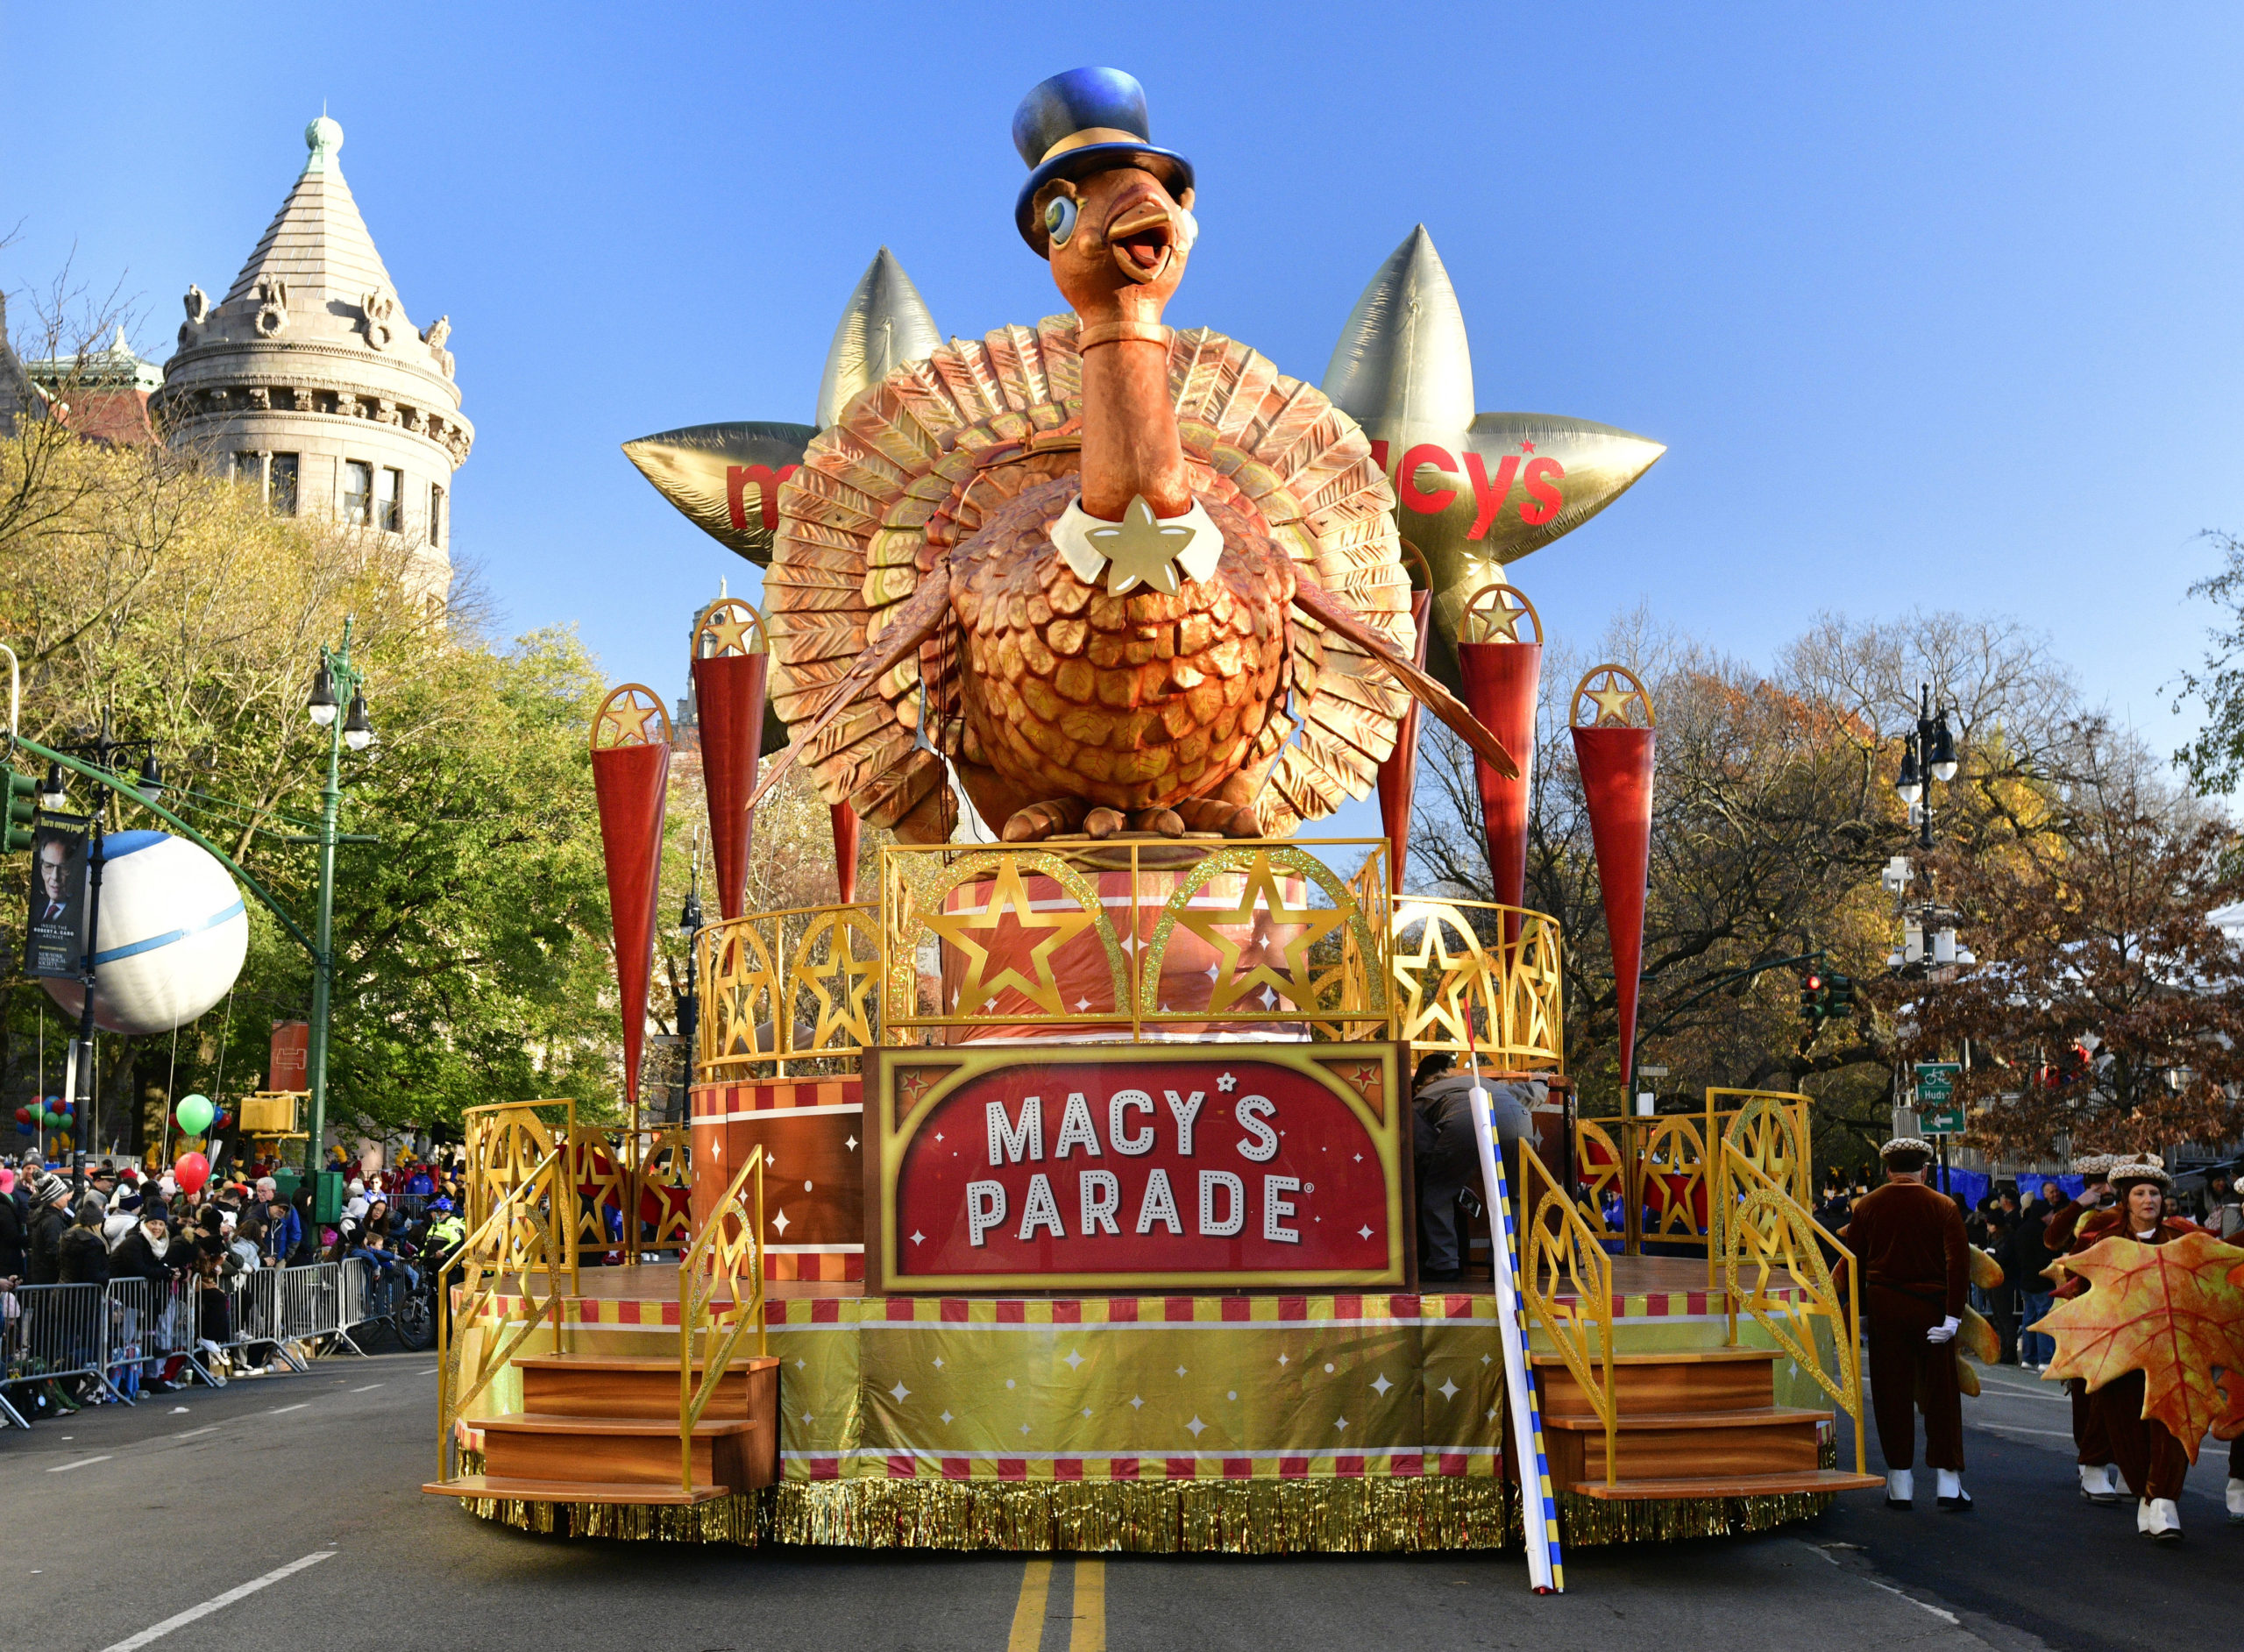 NEW YORK, NEW YORK - NOVEMBER 24: Tom Turkey by Macy's float is waiting for the parade to start during 96th Macy's Thanksgiving Day Parade on November 24, 2022 in New York City. (Photo by Eugene Gologursky/Getty Images for Macy's, Inc.)